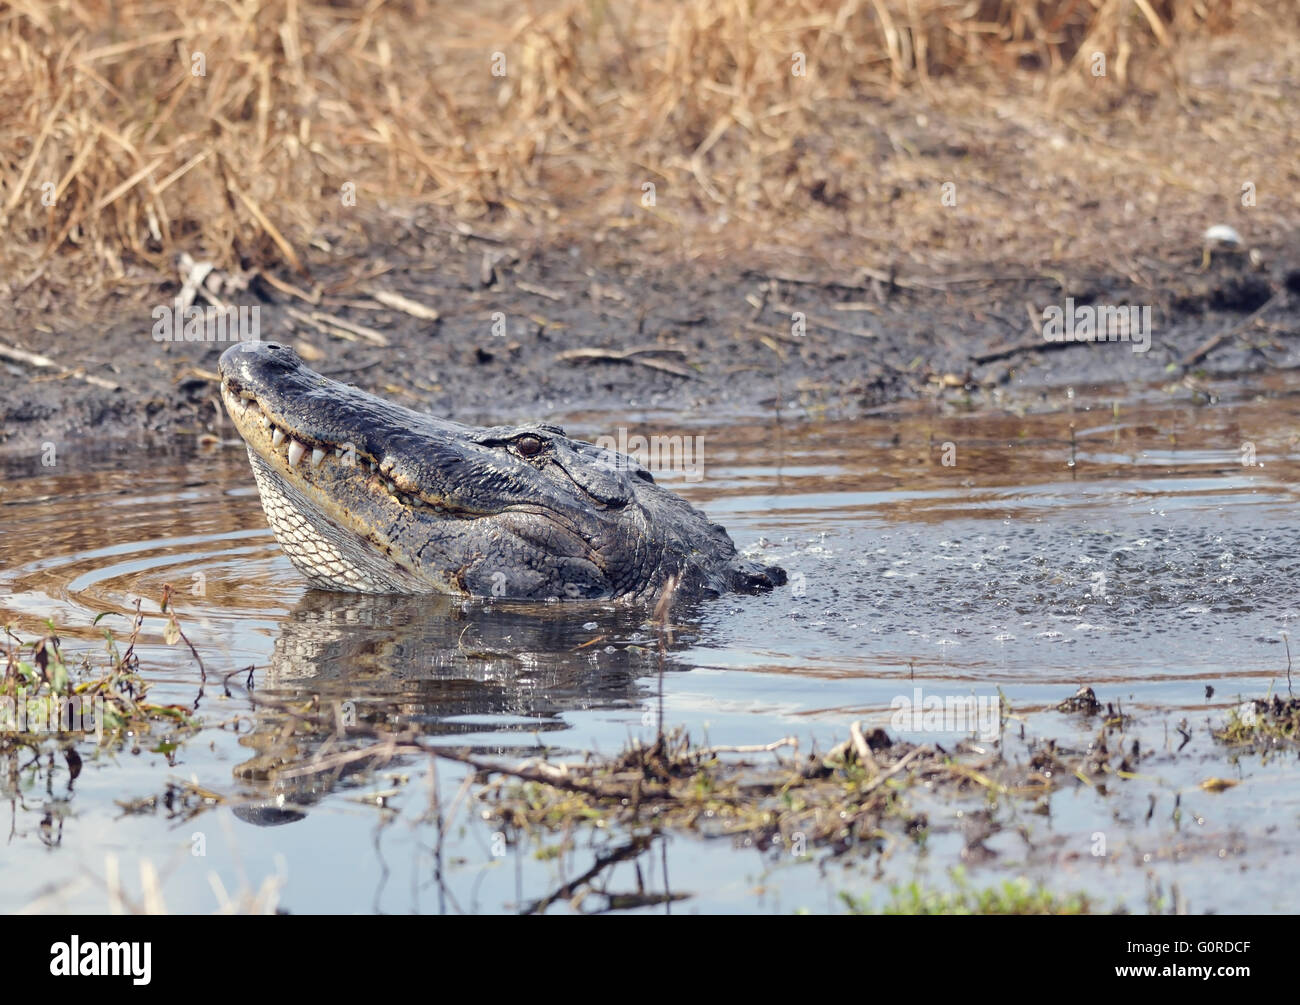 Large Bull Male Alligator Calls for a Mate Stock Photo